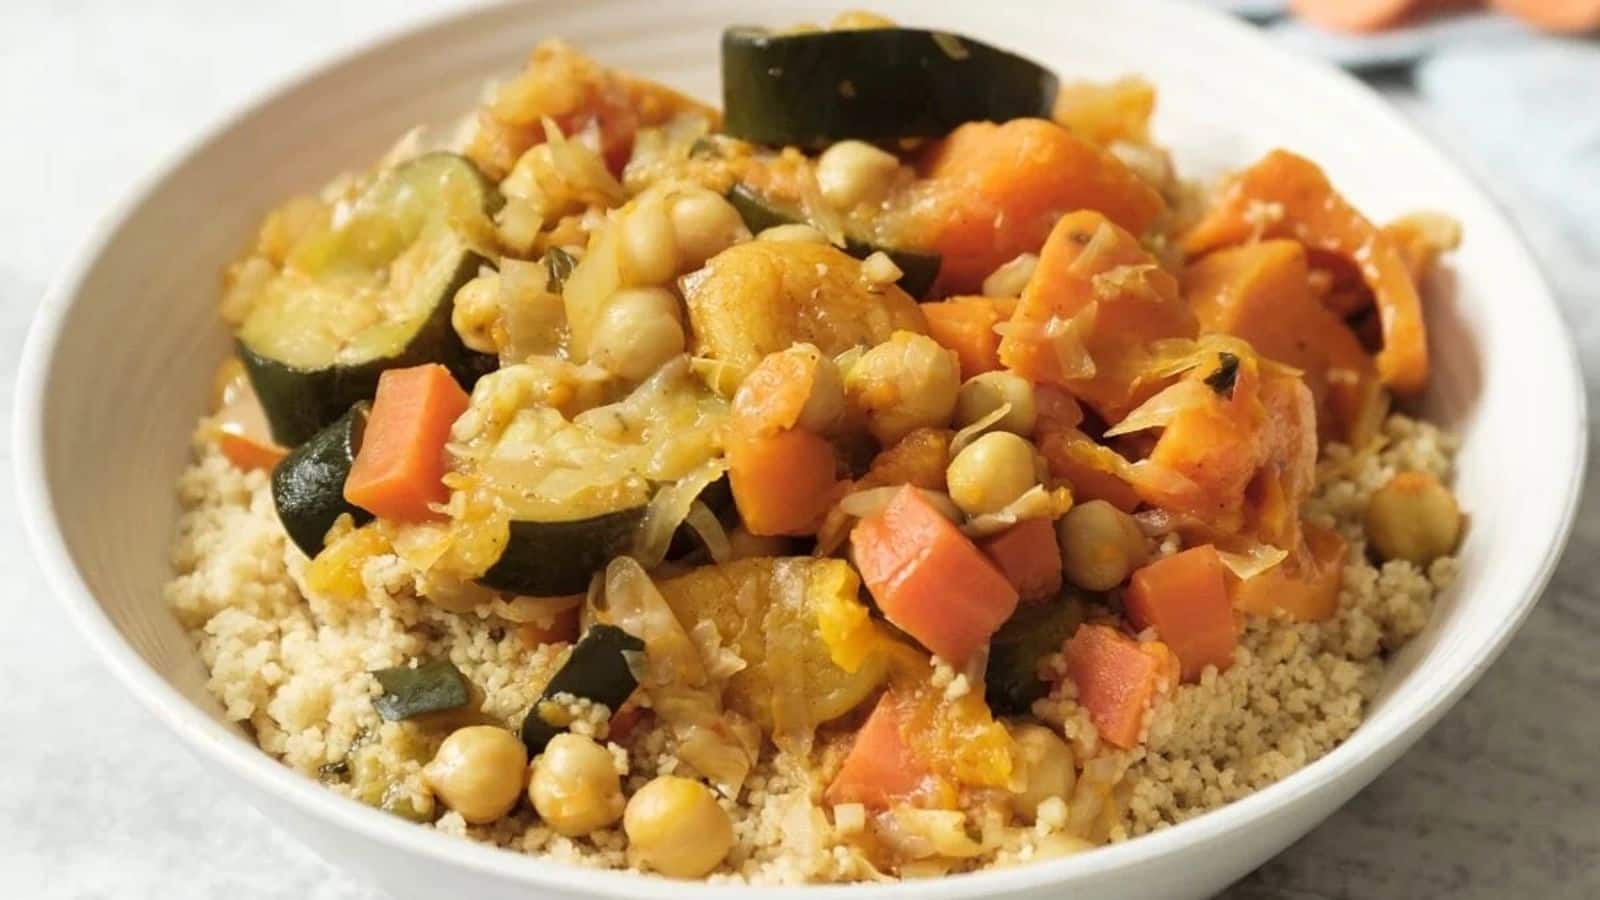 Check out this vegetarian Moroccan spiced couscous recipe